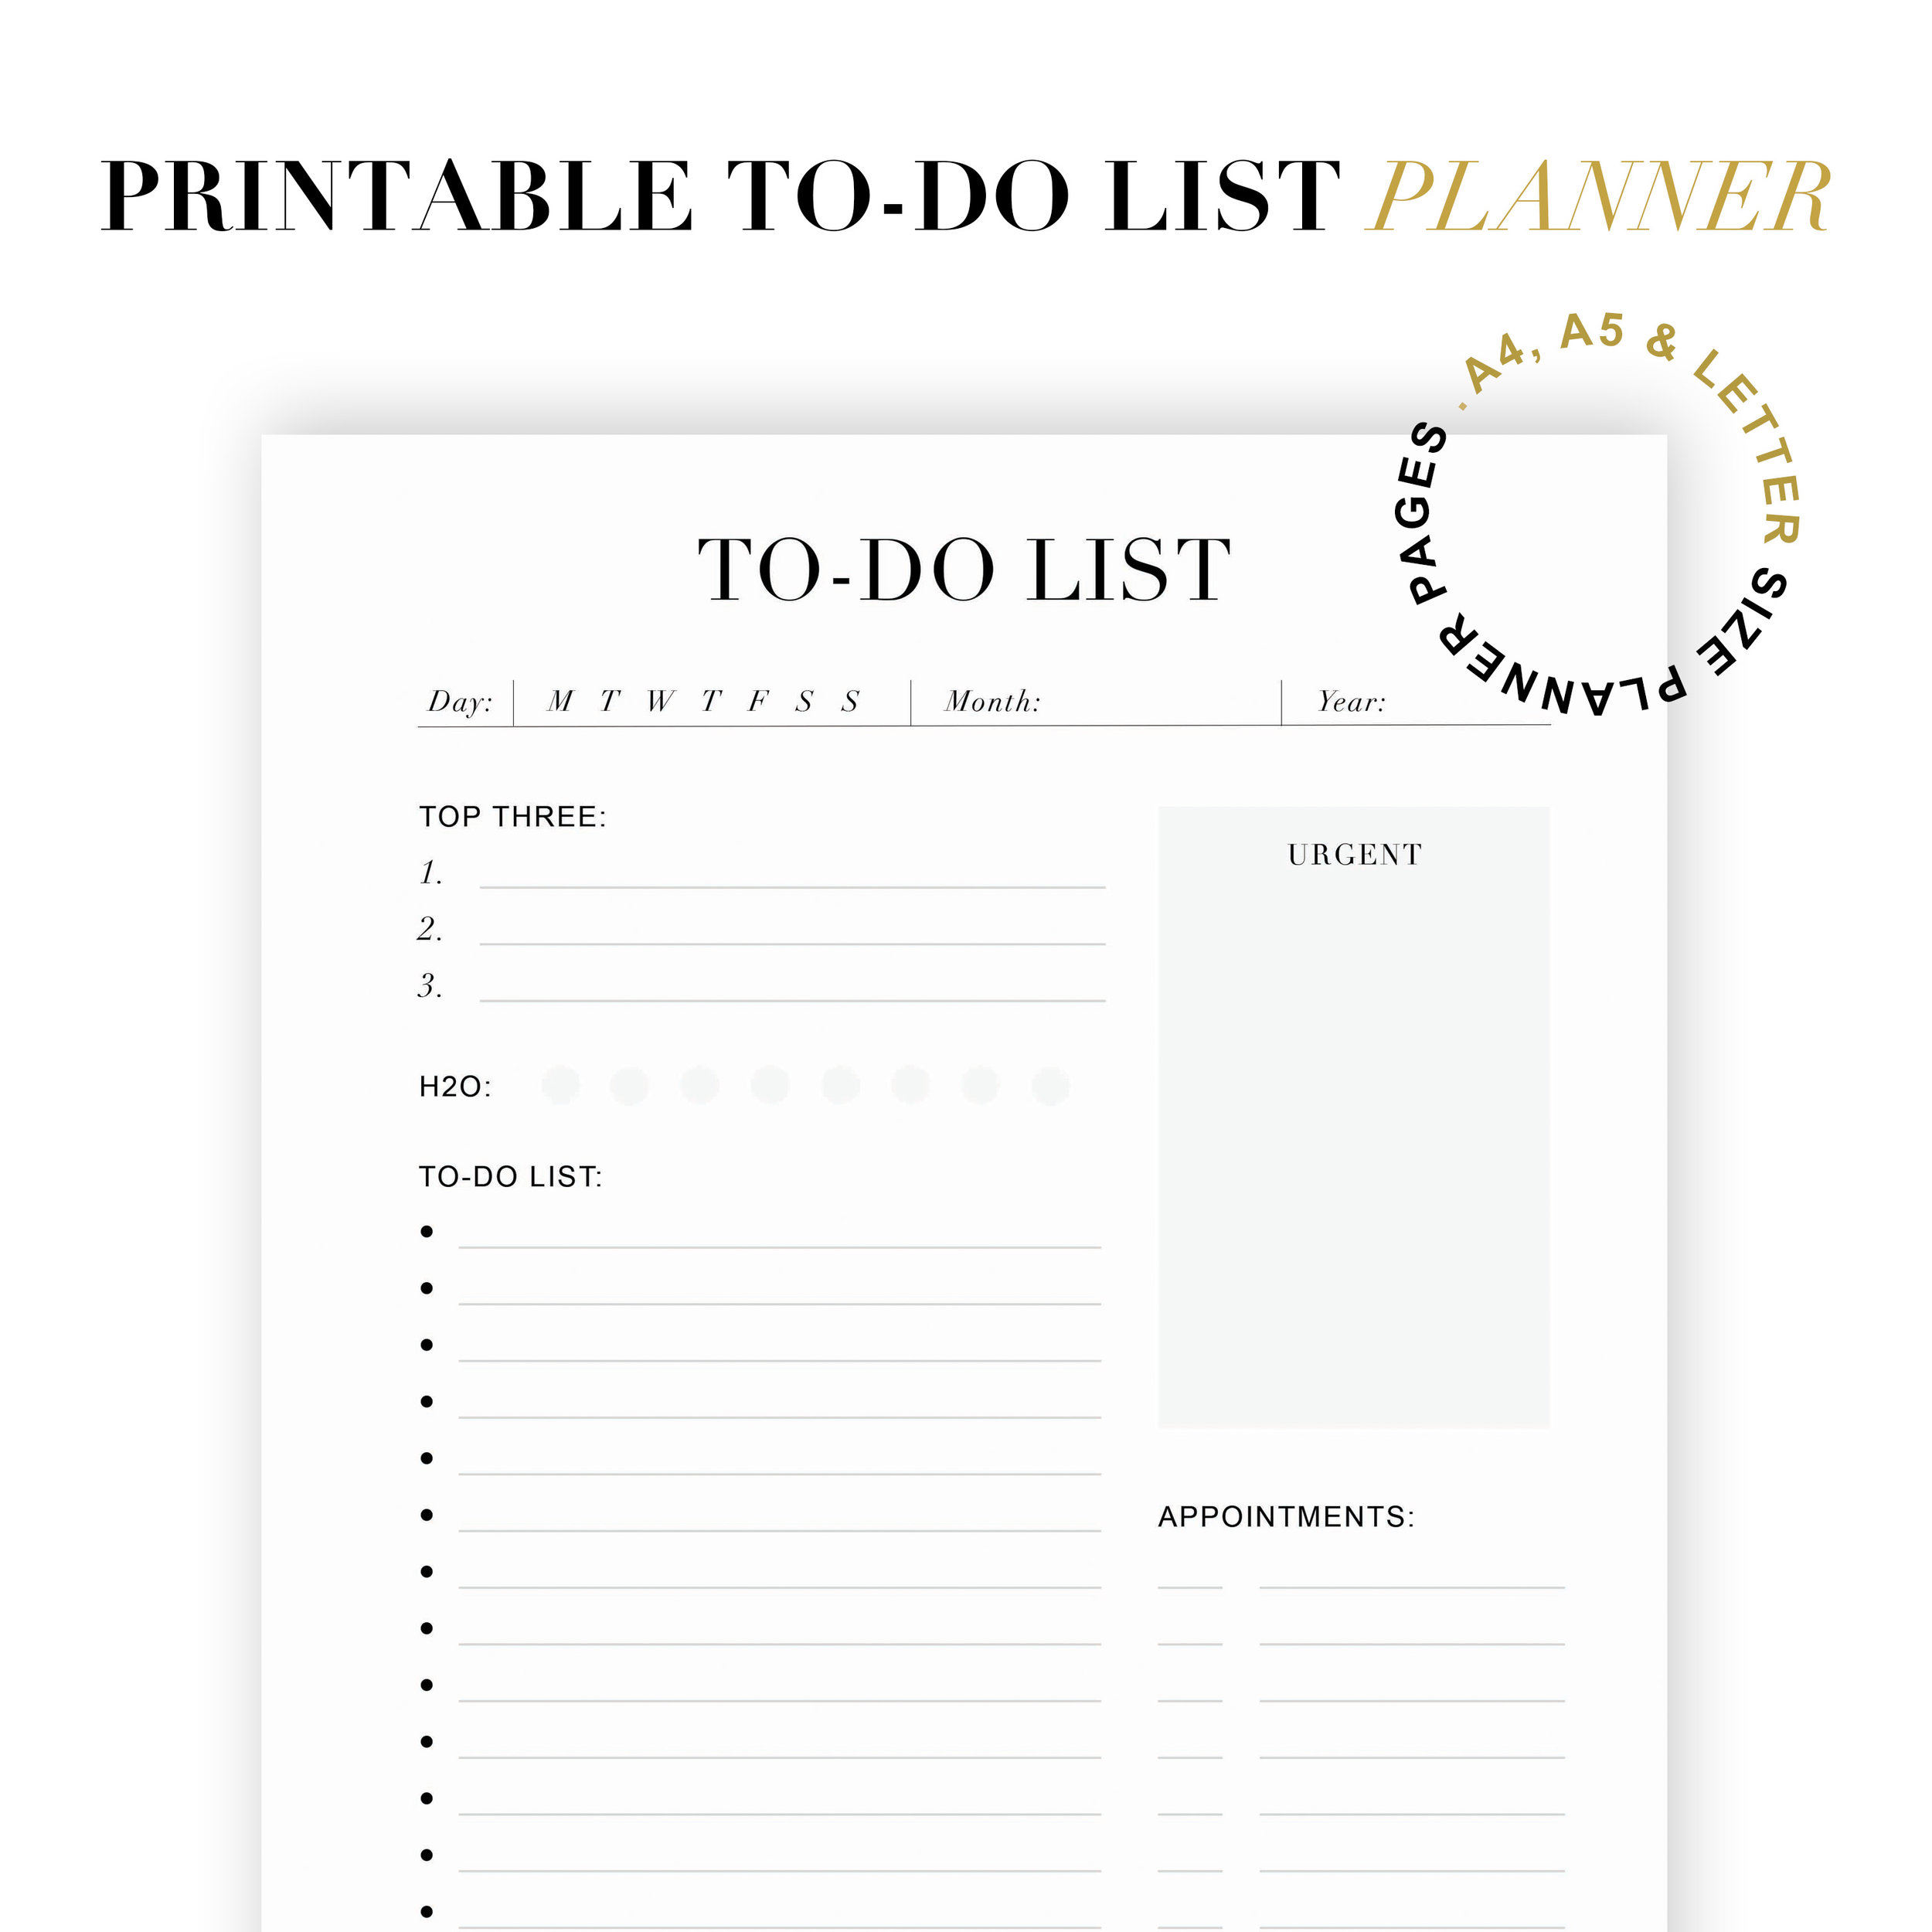 To Do List Planner Printable E Decorating Affordable Online Interior Design Shop Wall Art And Botanical Illustration Watercolour And Floral